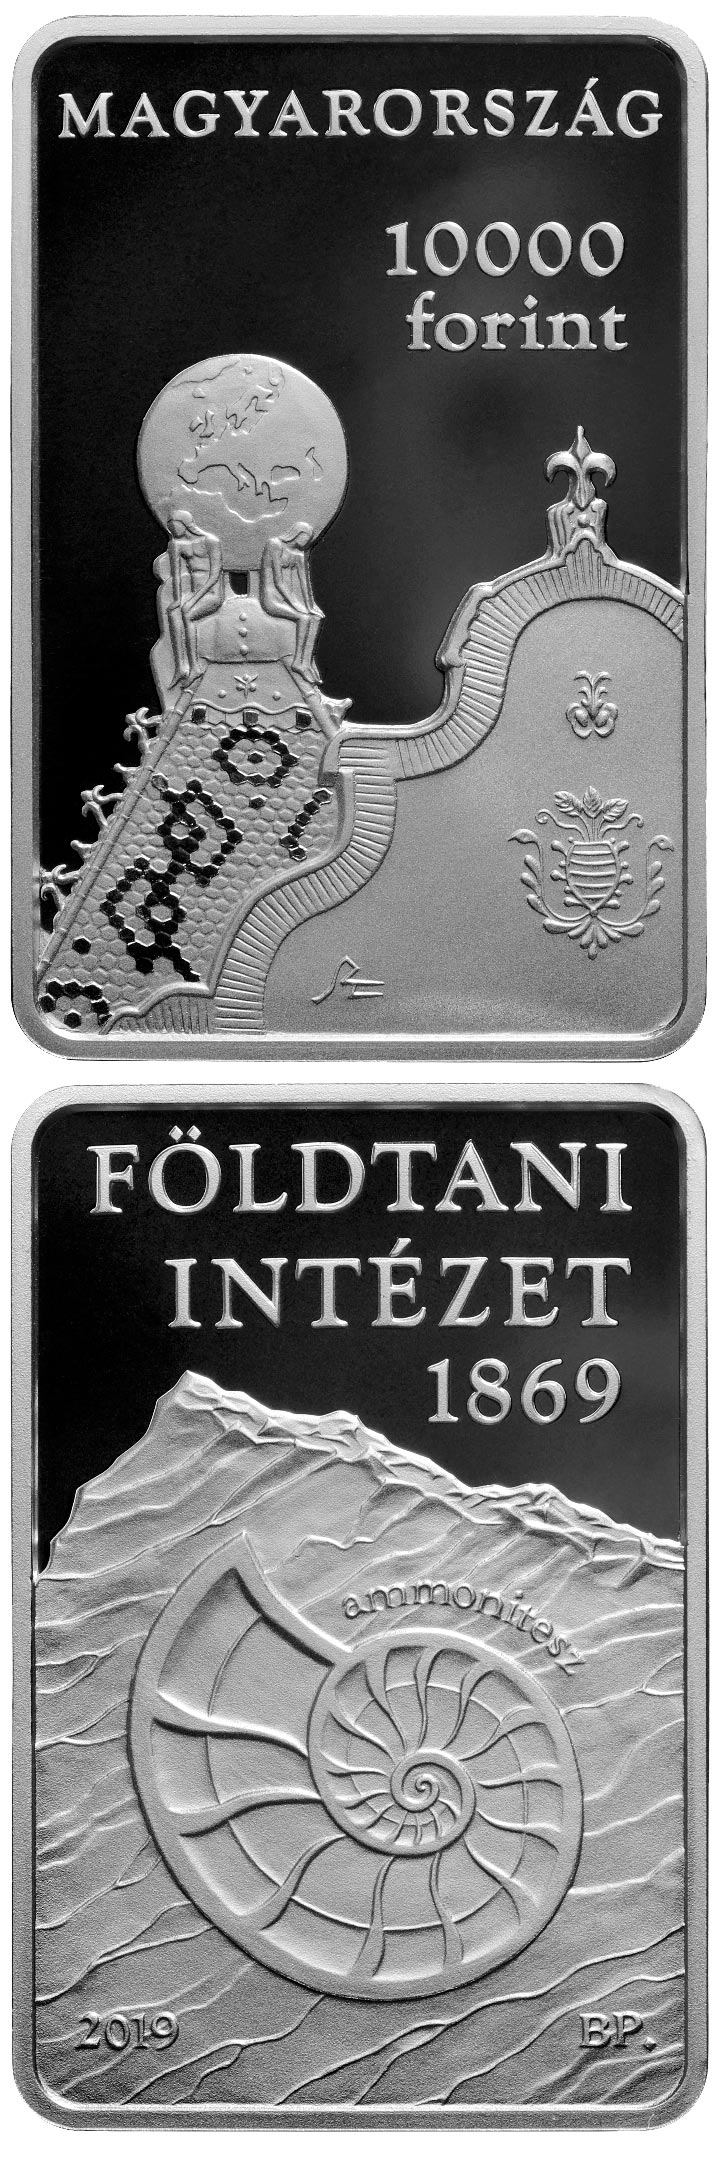 Image of 10000 forint coin - The 150th anniversary of the foundation
of the Geological Institute | Hungary 2019.  The Silver coin is of Proof quality.